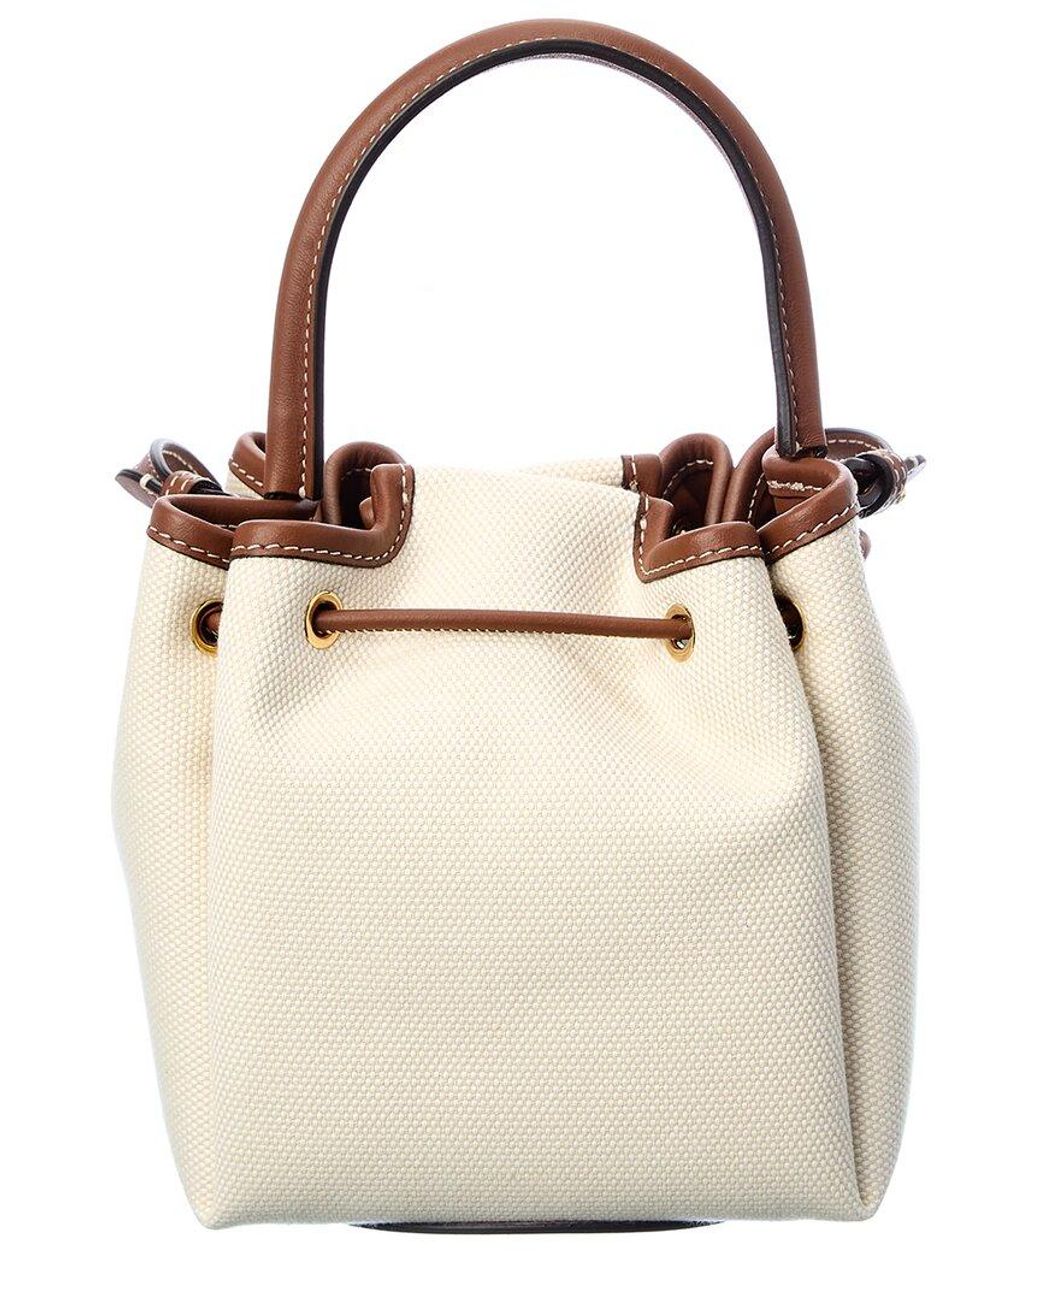 Burberry Monogram Motif Canvas & Leather Bucket Bag in White | Lyst